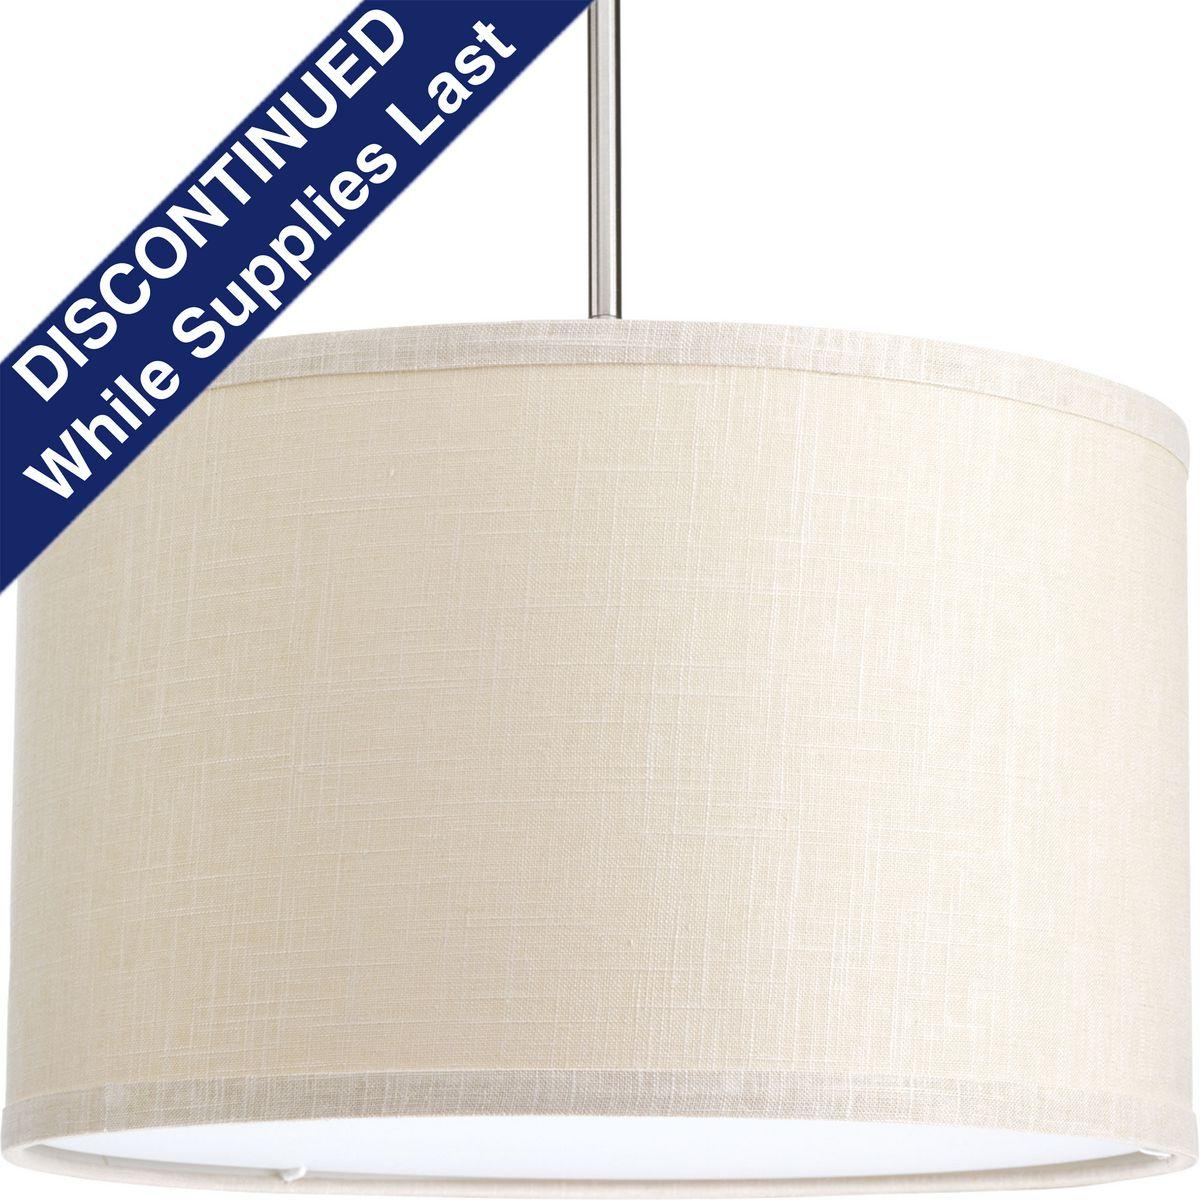 Hubbell P8829-59 The Markor Series is a modular pendant system. The versatile series allow the choice of shades and stem kits. This 16" shade with harvest linen fabric is inspired by mid-century design. Acrylic bottom diffuser. This shade can be used with a variety of ste